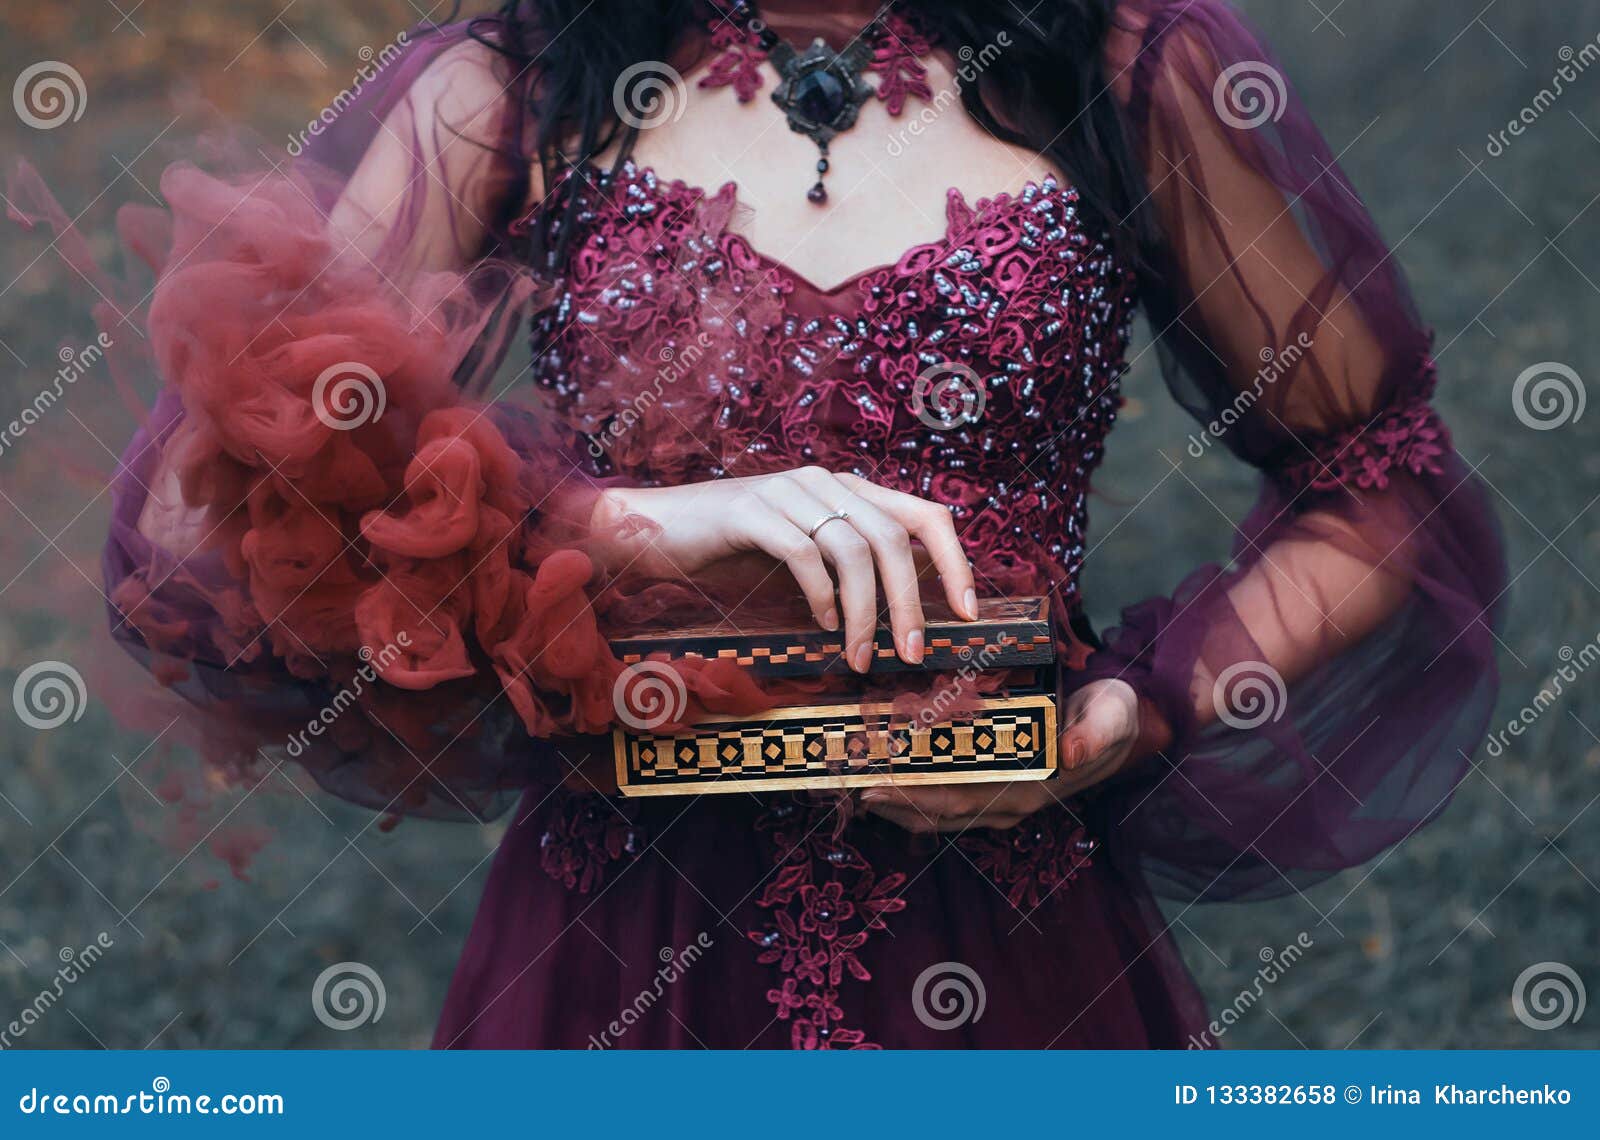 legend of pandora`s box, girl with black hair, dressed in a purple luxurious gorgeous dress, an antique casket opened